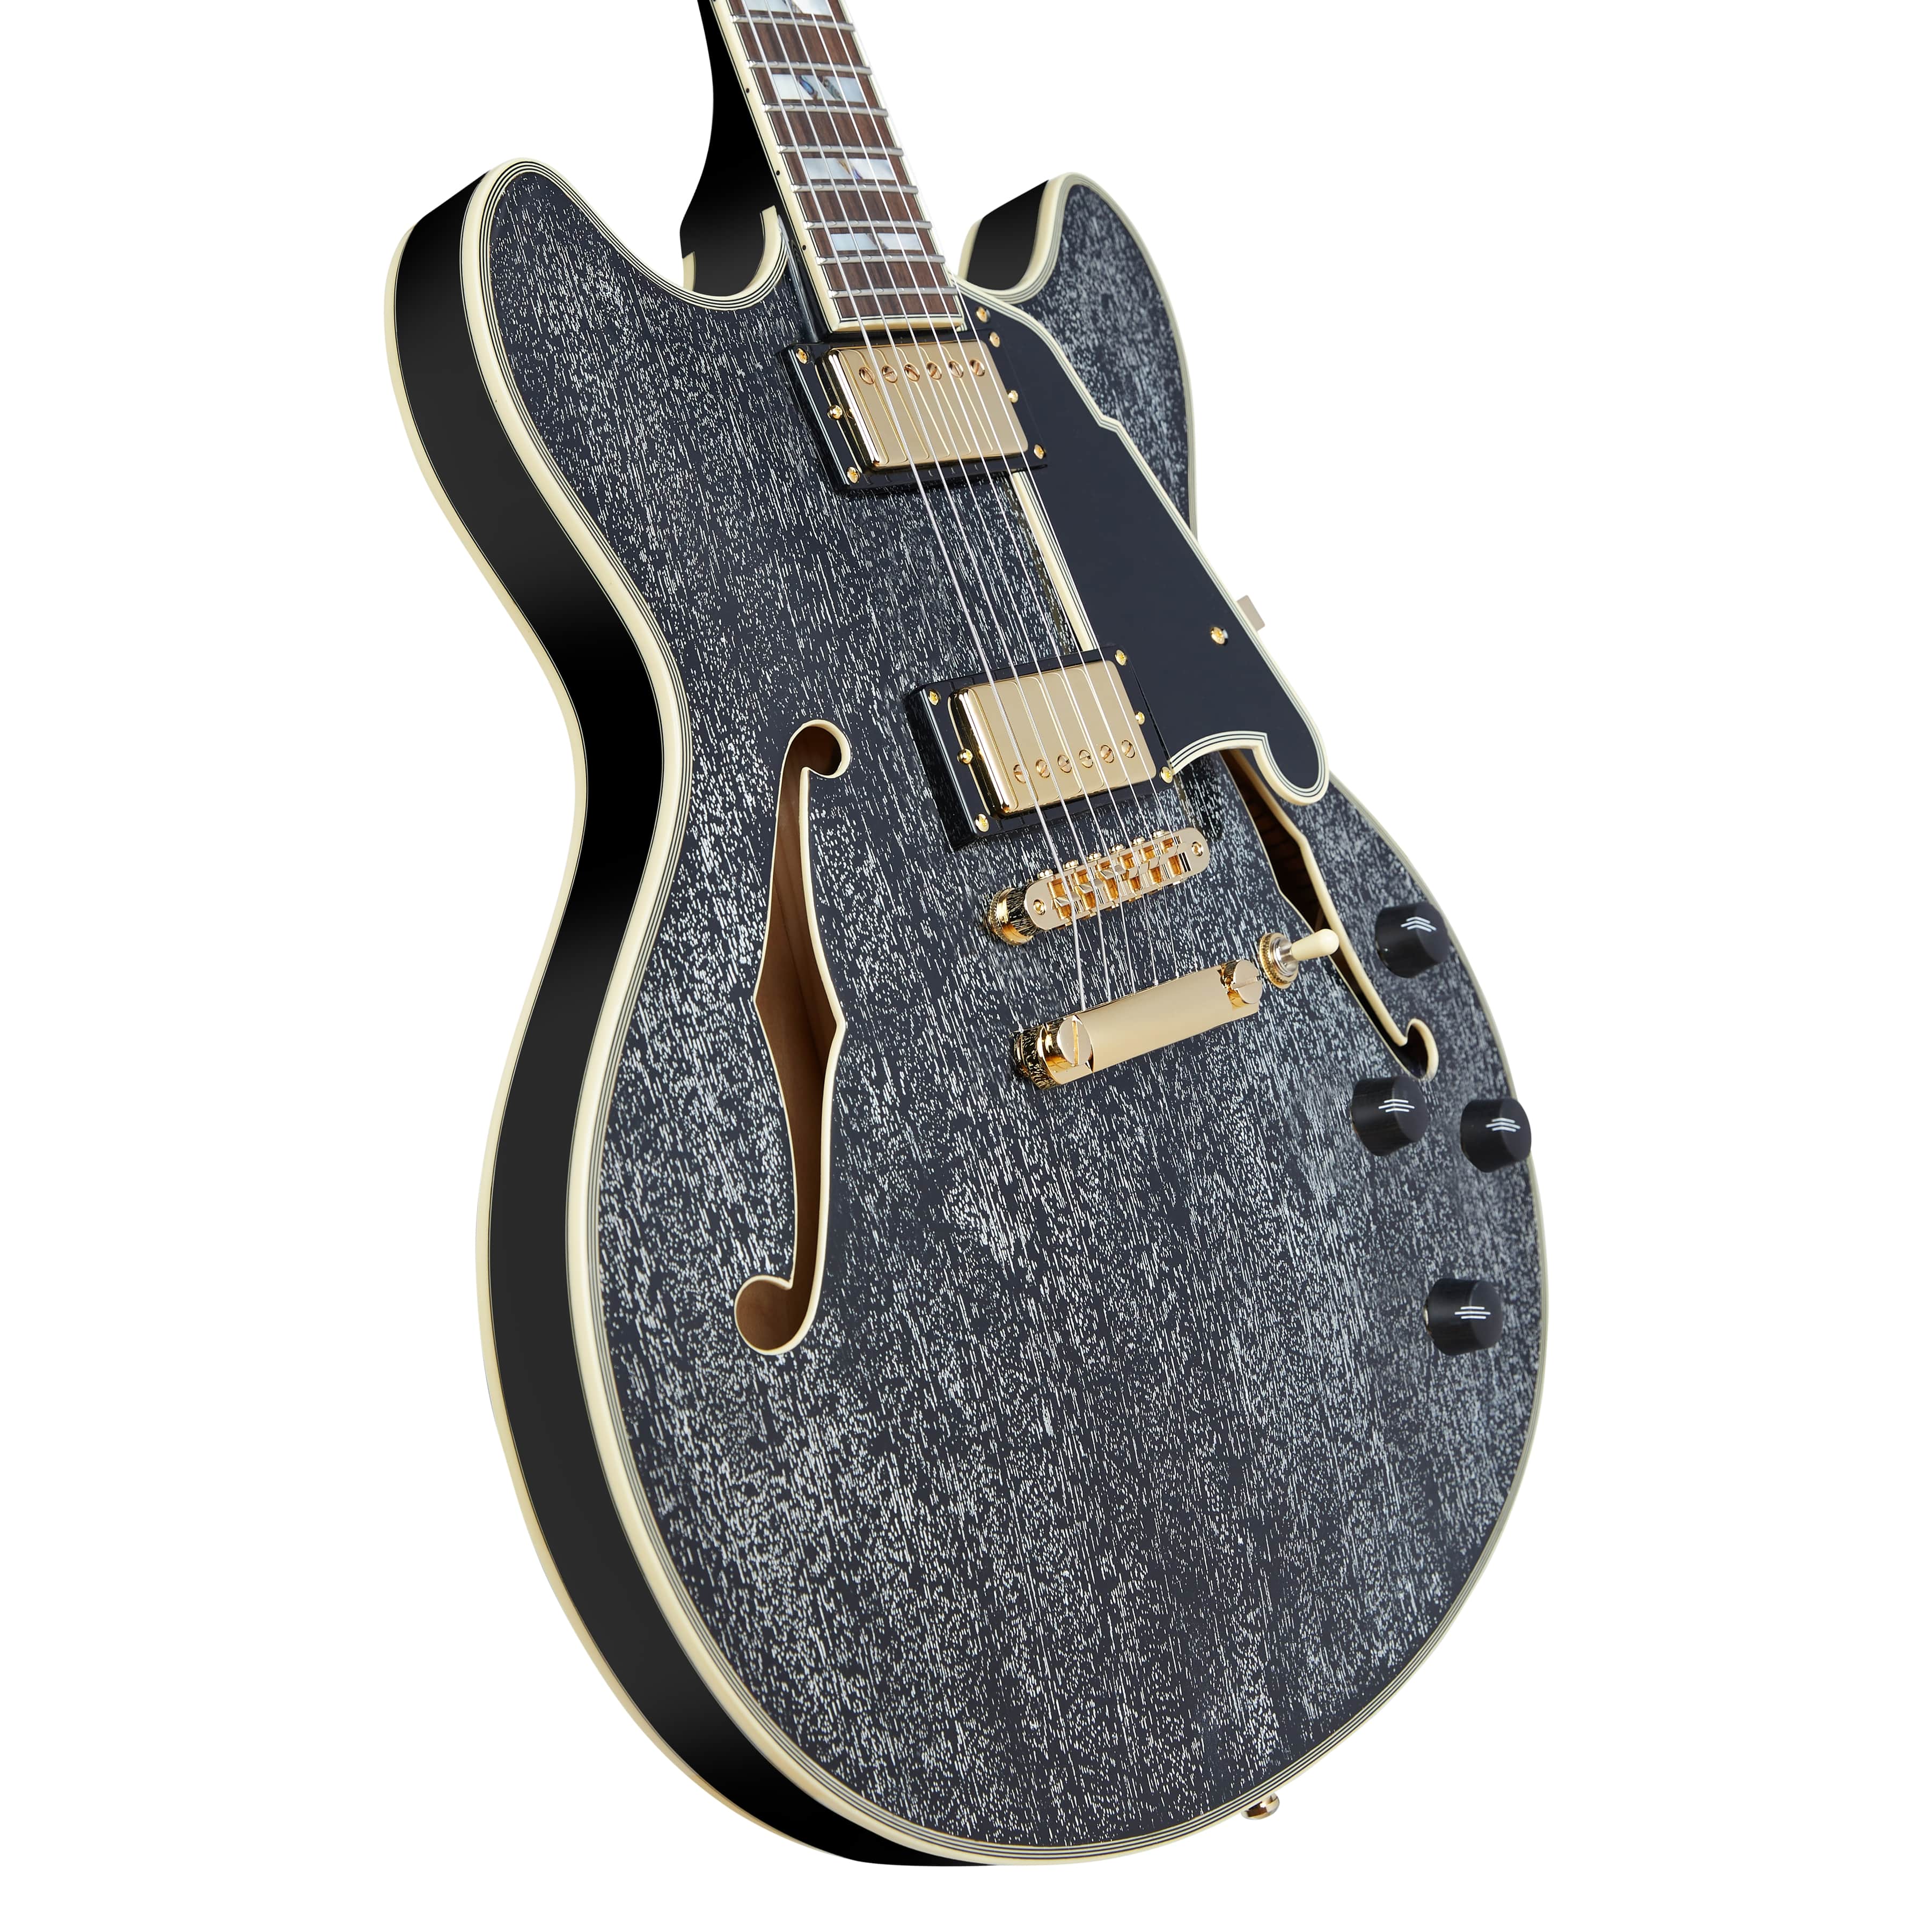 D'Angelico Excel DC Semi-hollowbody Electric Guitar With Stopbar Tailpiece Black Dog DAEDCBDGS